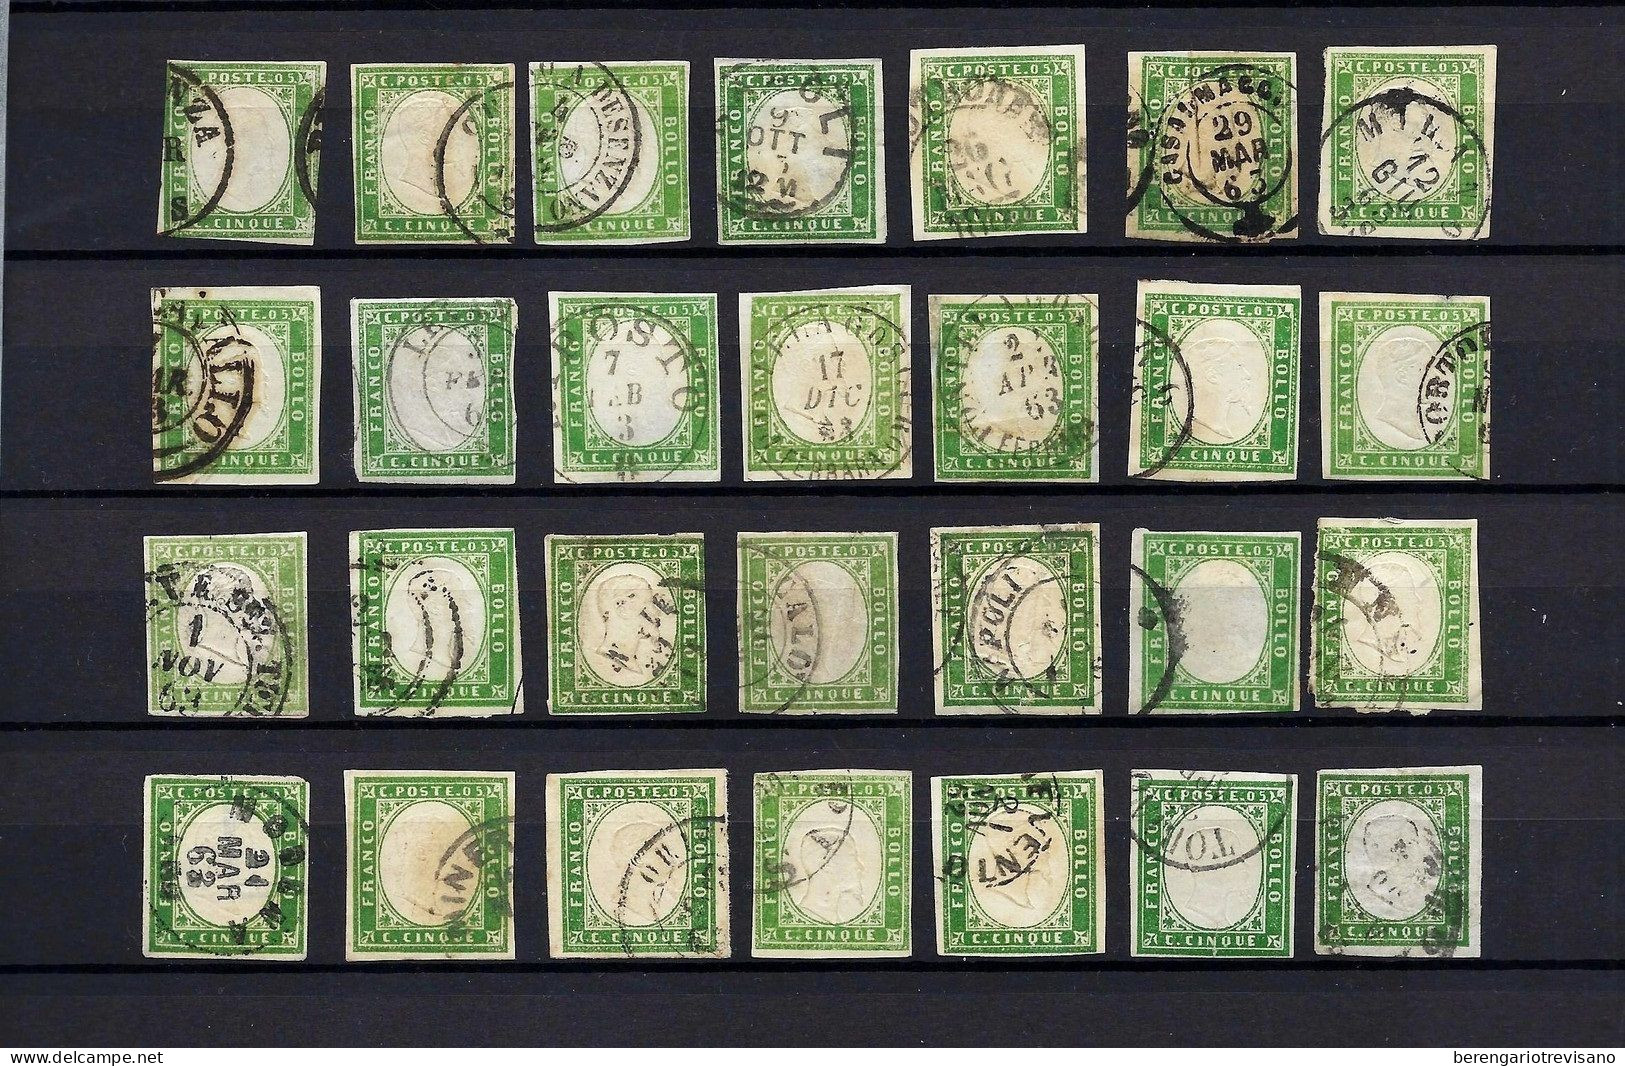 Italy Sardegna 1855 to 1863 stamps lot